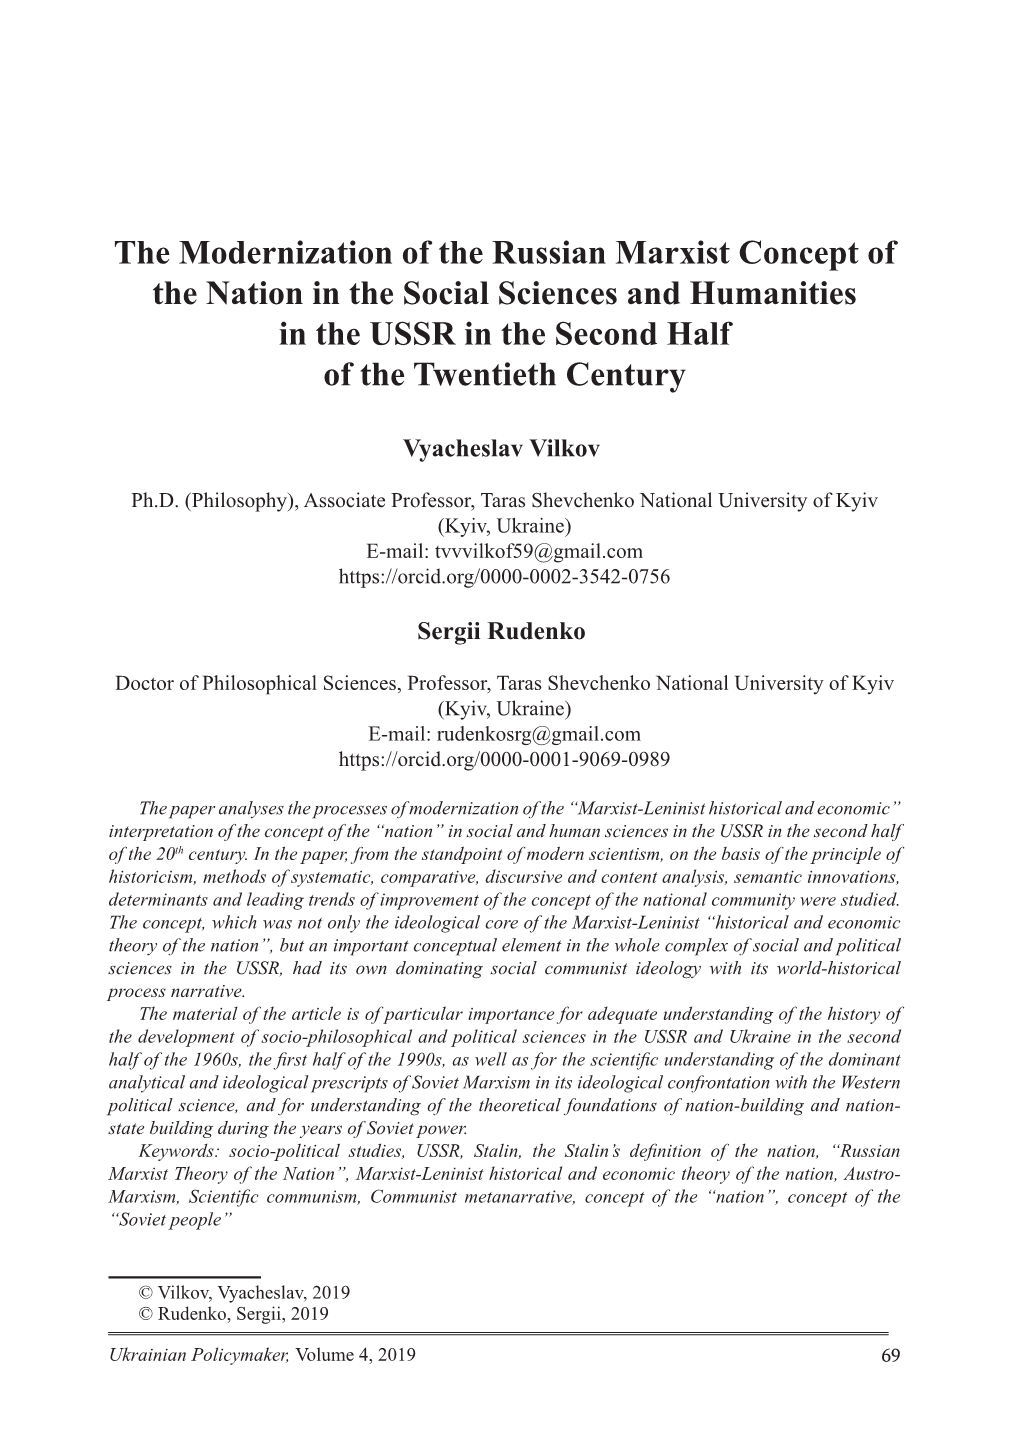 The Modernization of the Russian Marxist Concept of the Nation in the Social Sciences and Humanities in the USSR in the Second Half of the Twentieth Century